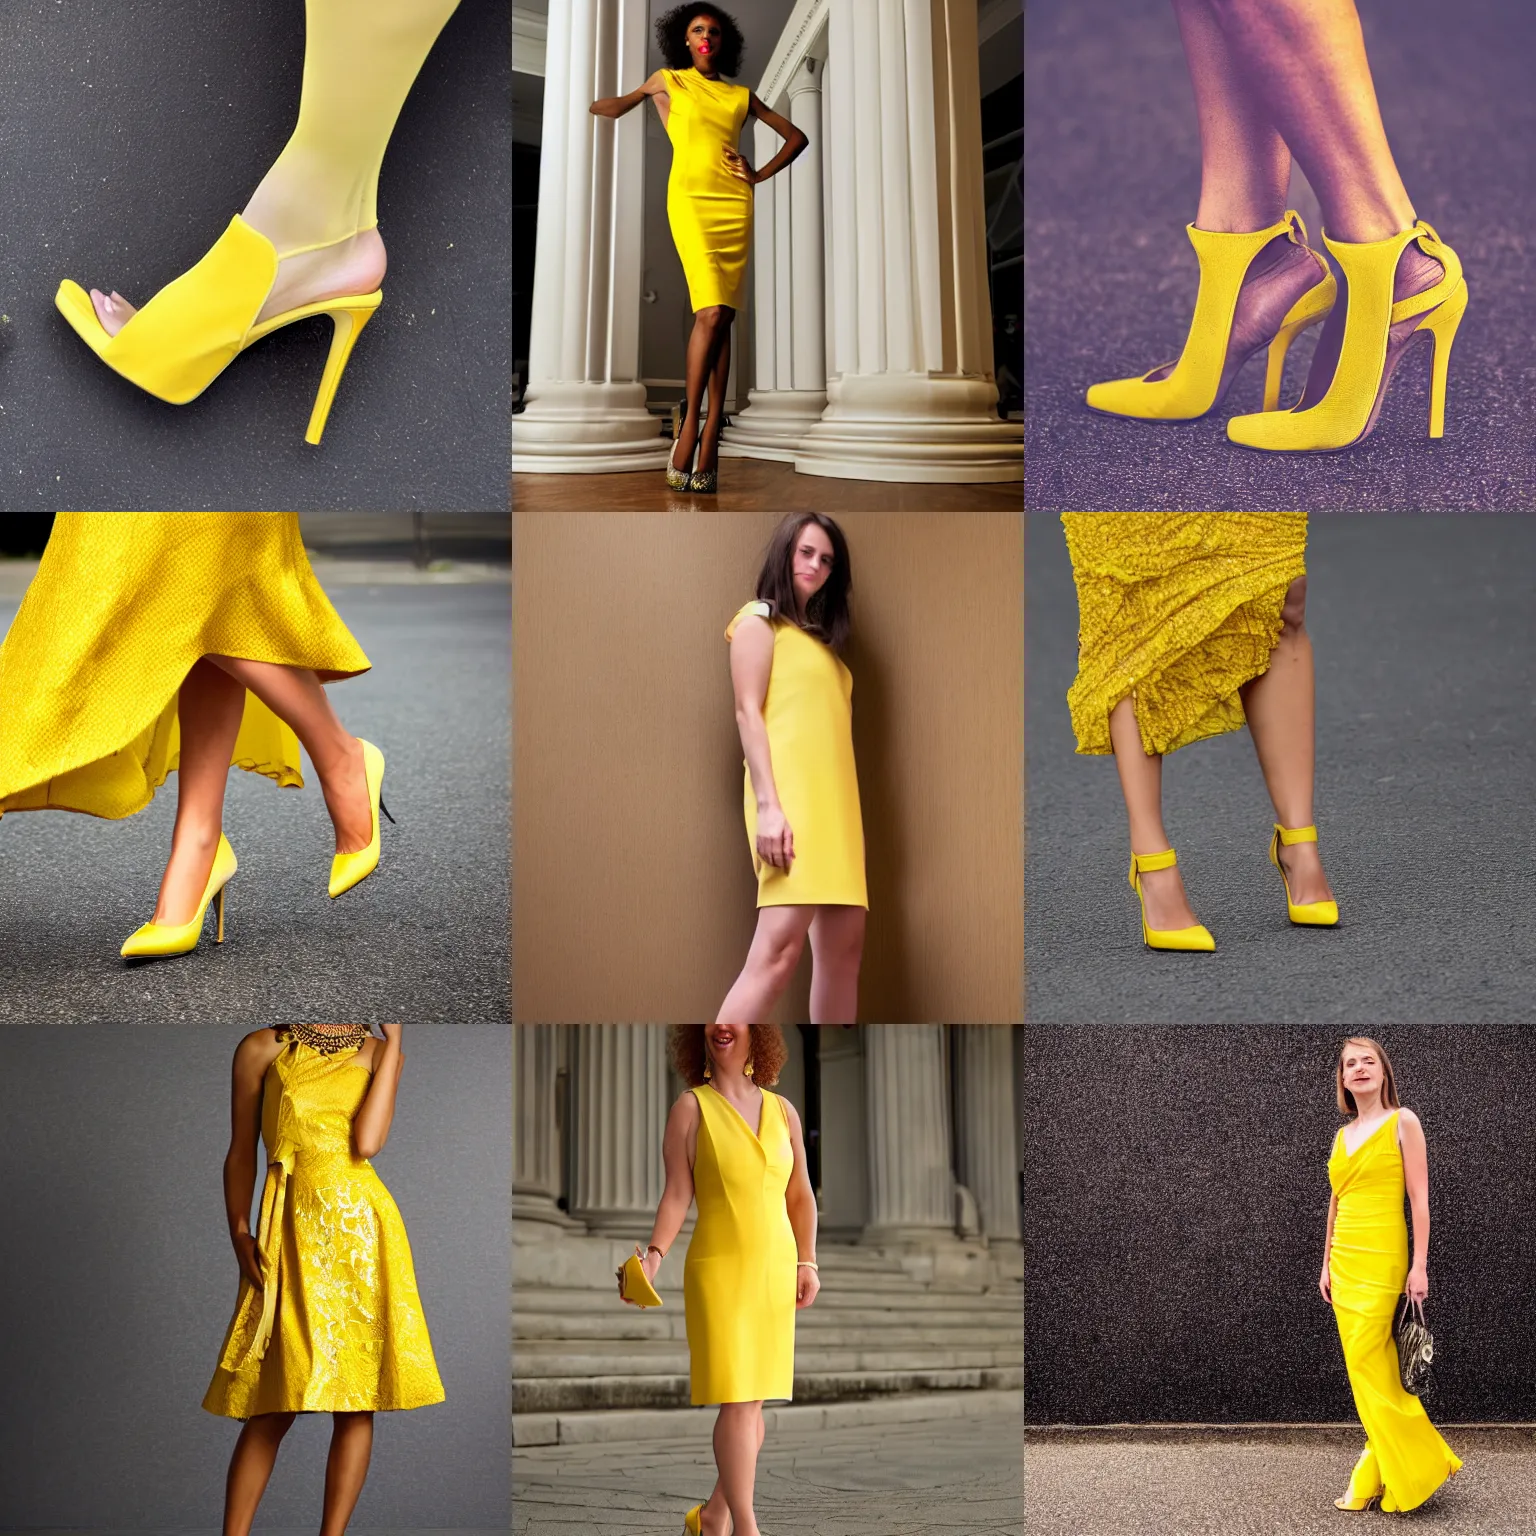 Prompt: photo of an elegant yellow woman's dress with leg visible wearing a high heel